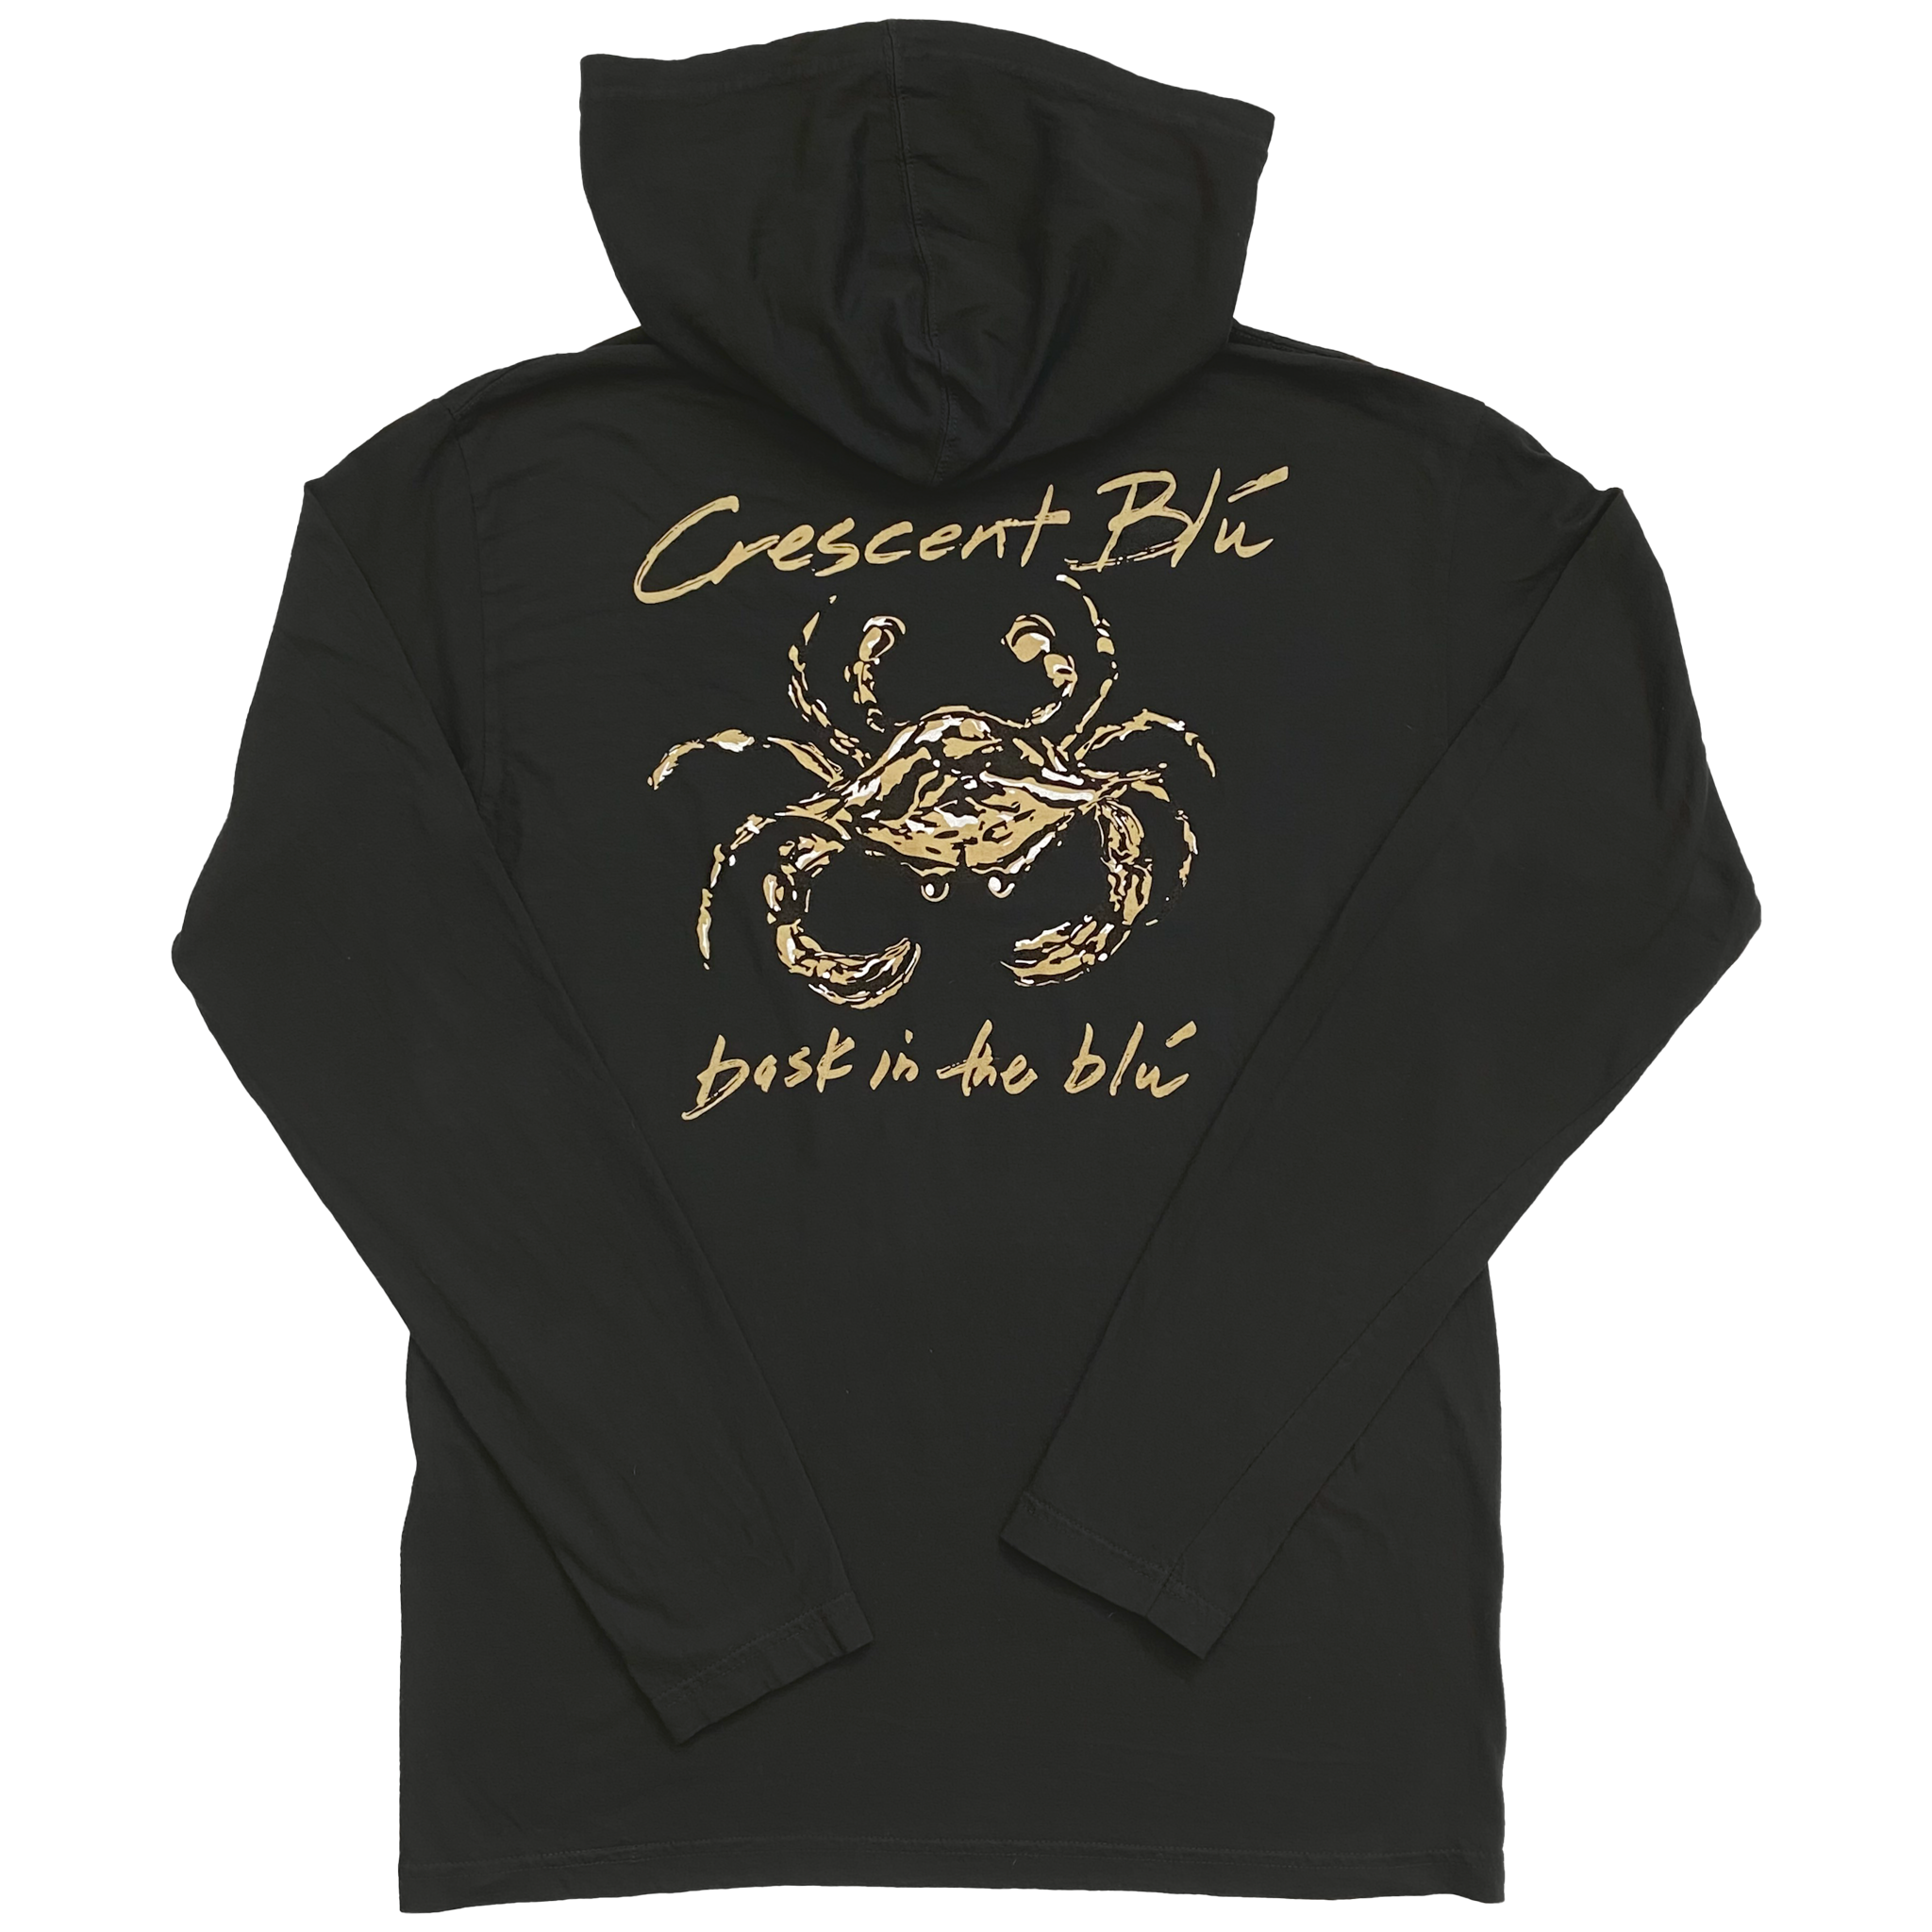 The back of a black long sleeve hooded cotton t-shirt. Across the upper back, Crescent Blu is written in gold above a black, gold, and white crab. Beneath the crab, written in gold, is bask in the blu. Sleeves and shirt bottom have t-shirt hems.